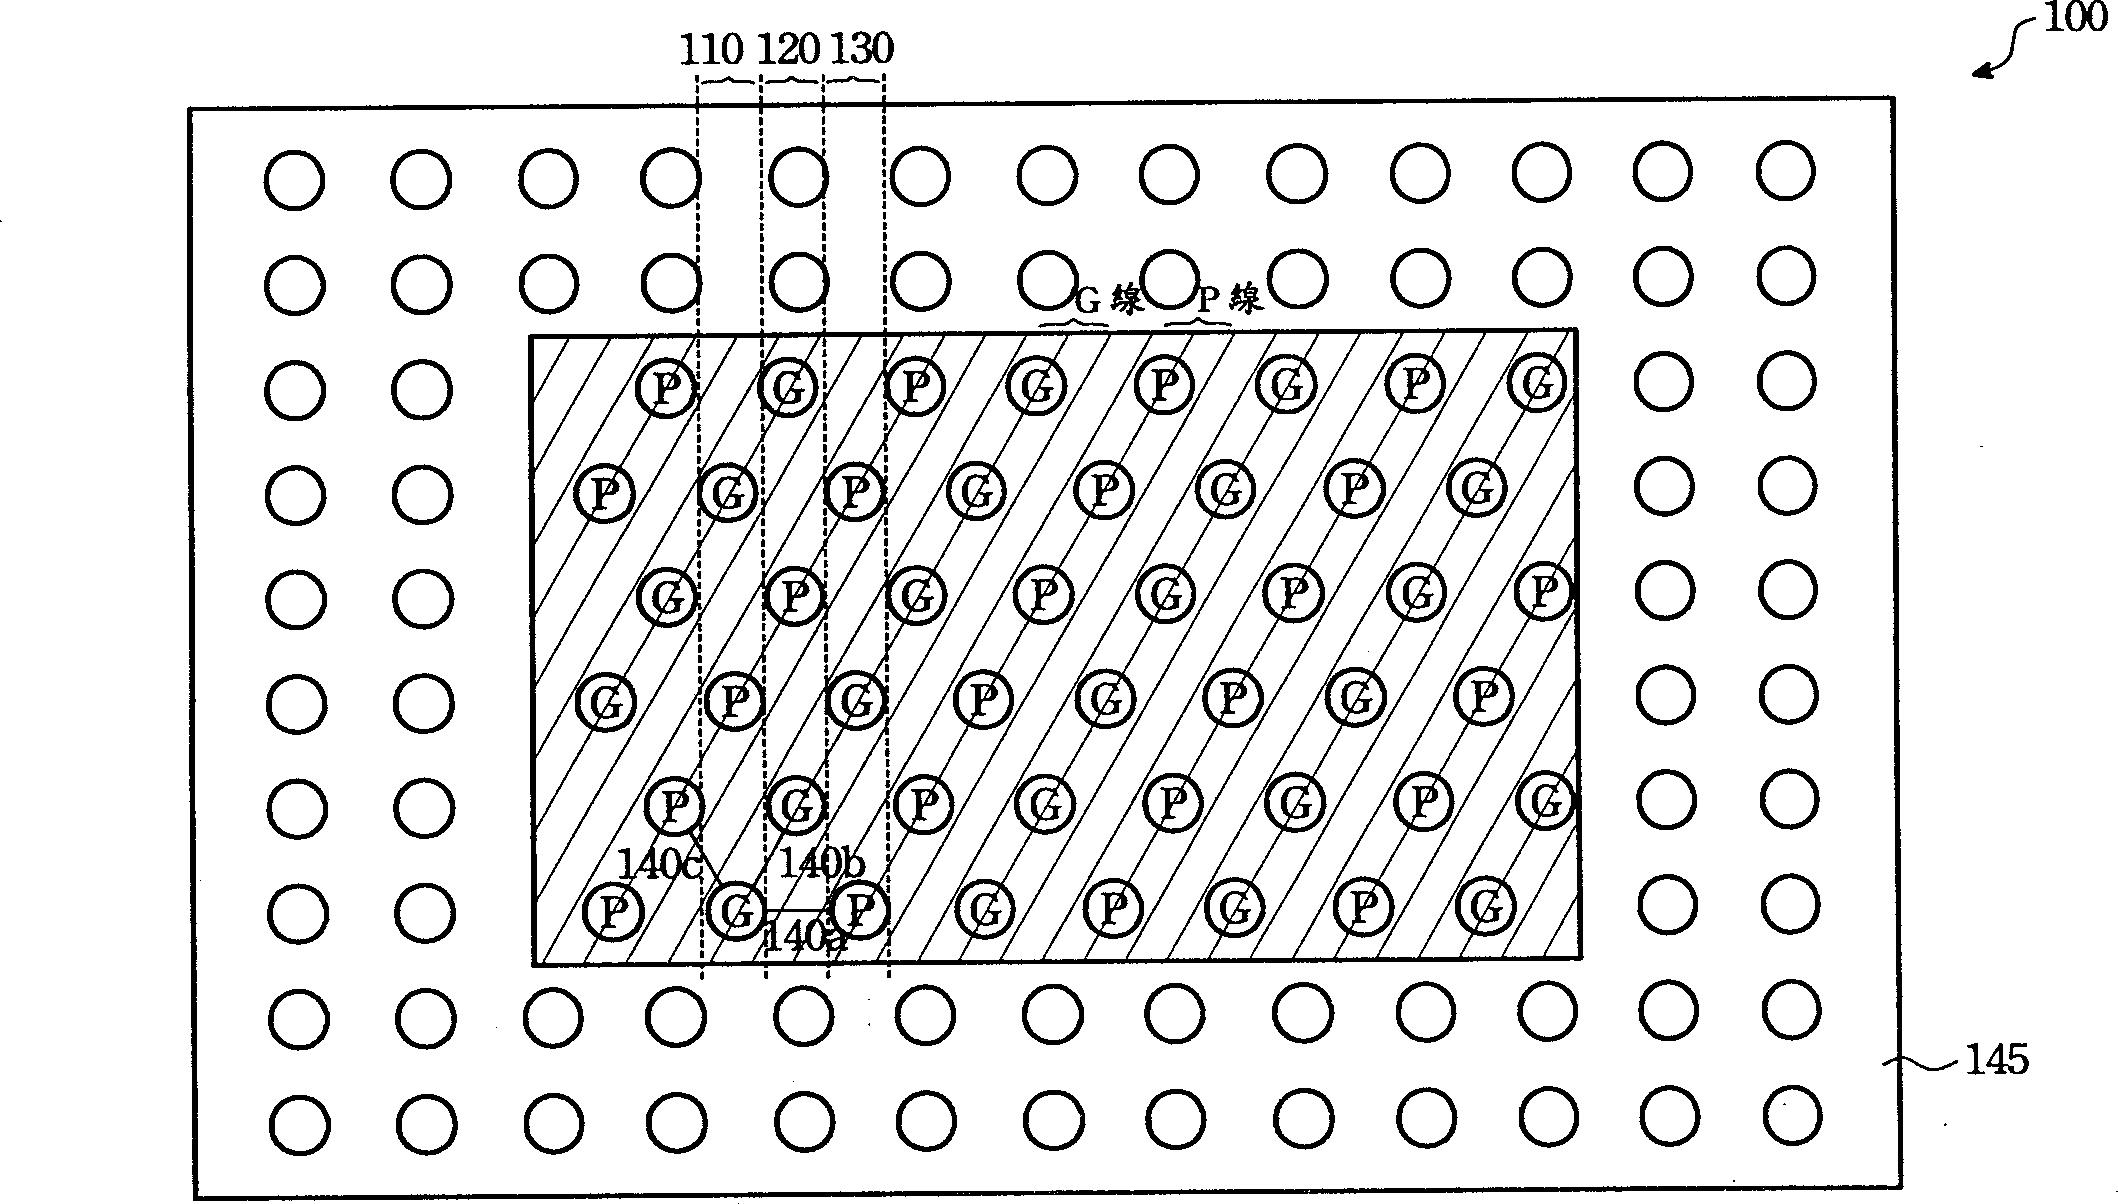 Chip conducting lug and re-distributed wire layer configuration